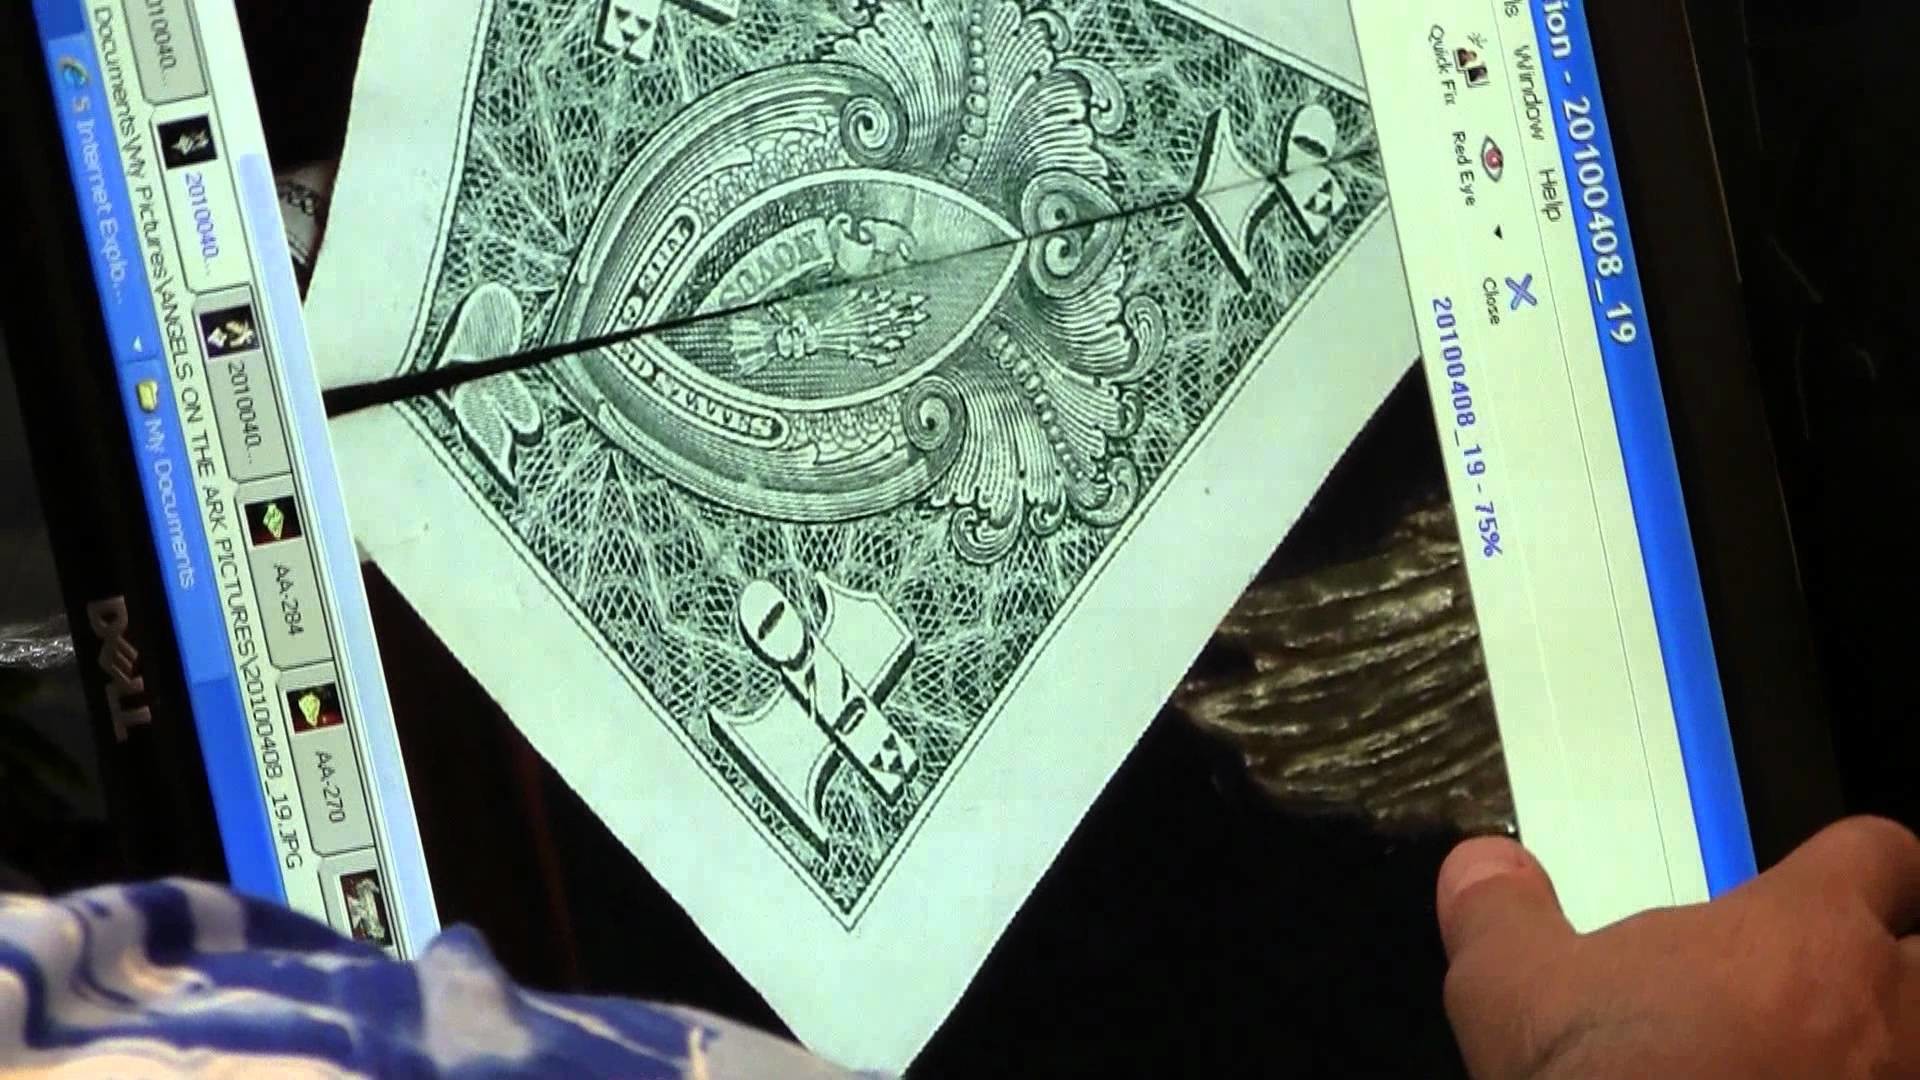 1920x1080 SACRED GEOMETRY & A 300 MILLION YEAR OLD VAMPIRE SQUID ON $1BILL  20110710161402